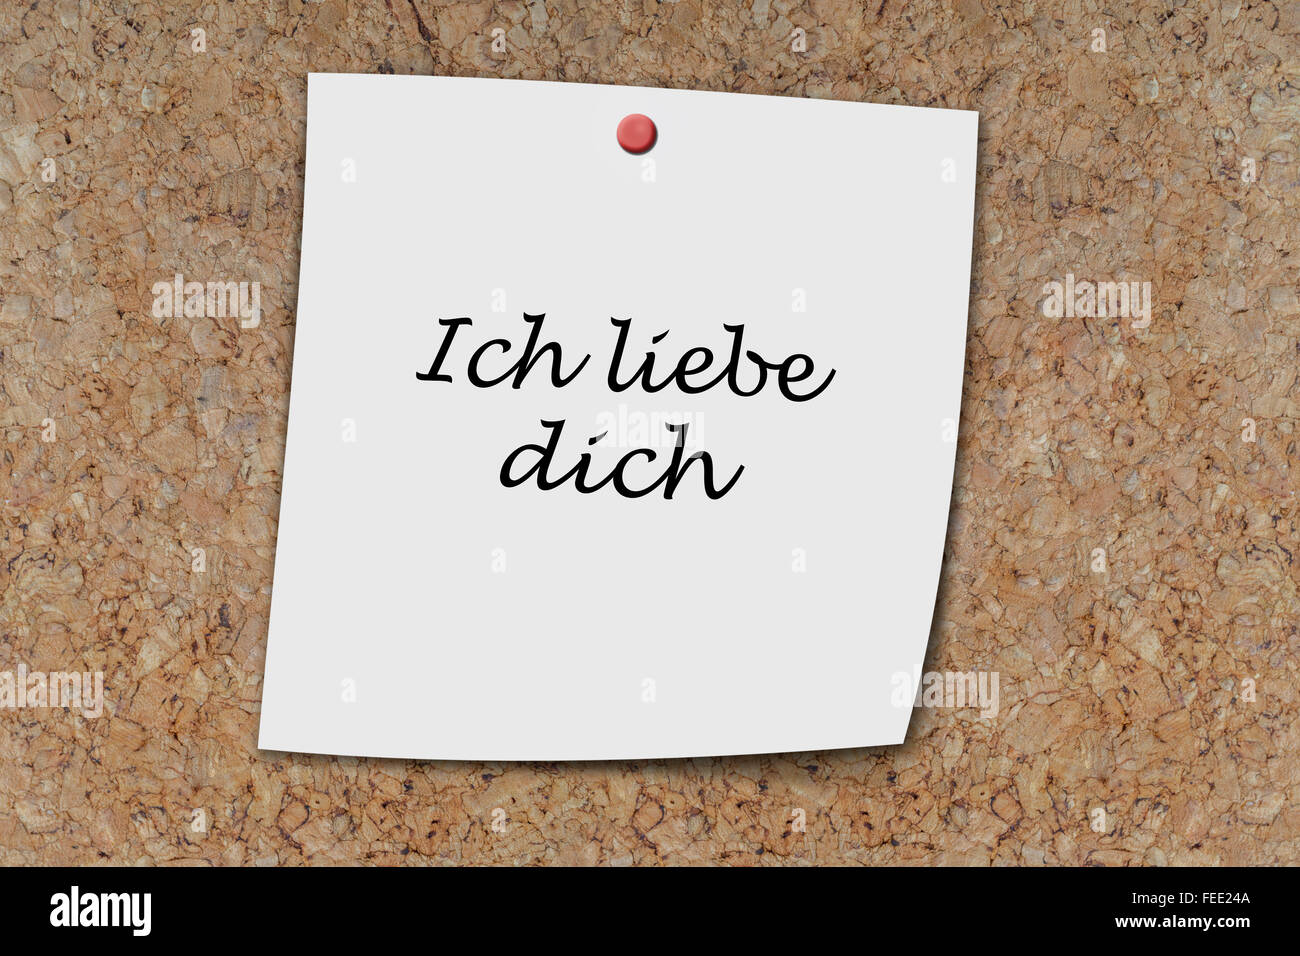 Ich liebe dich (German I love you) written on a memo pinned on a cork board Stock Photo